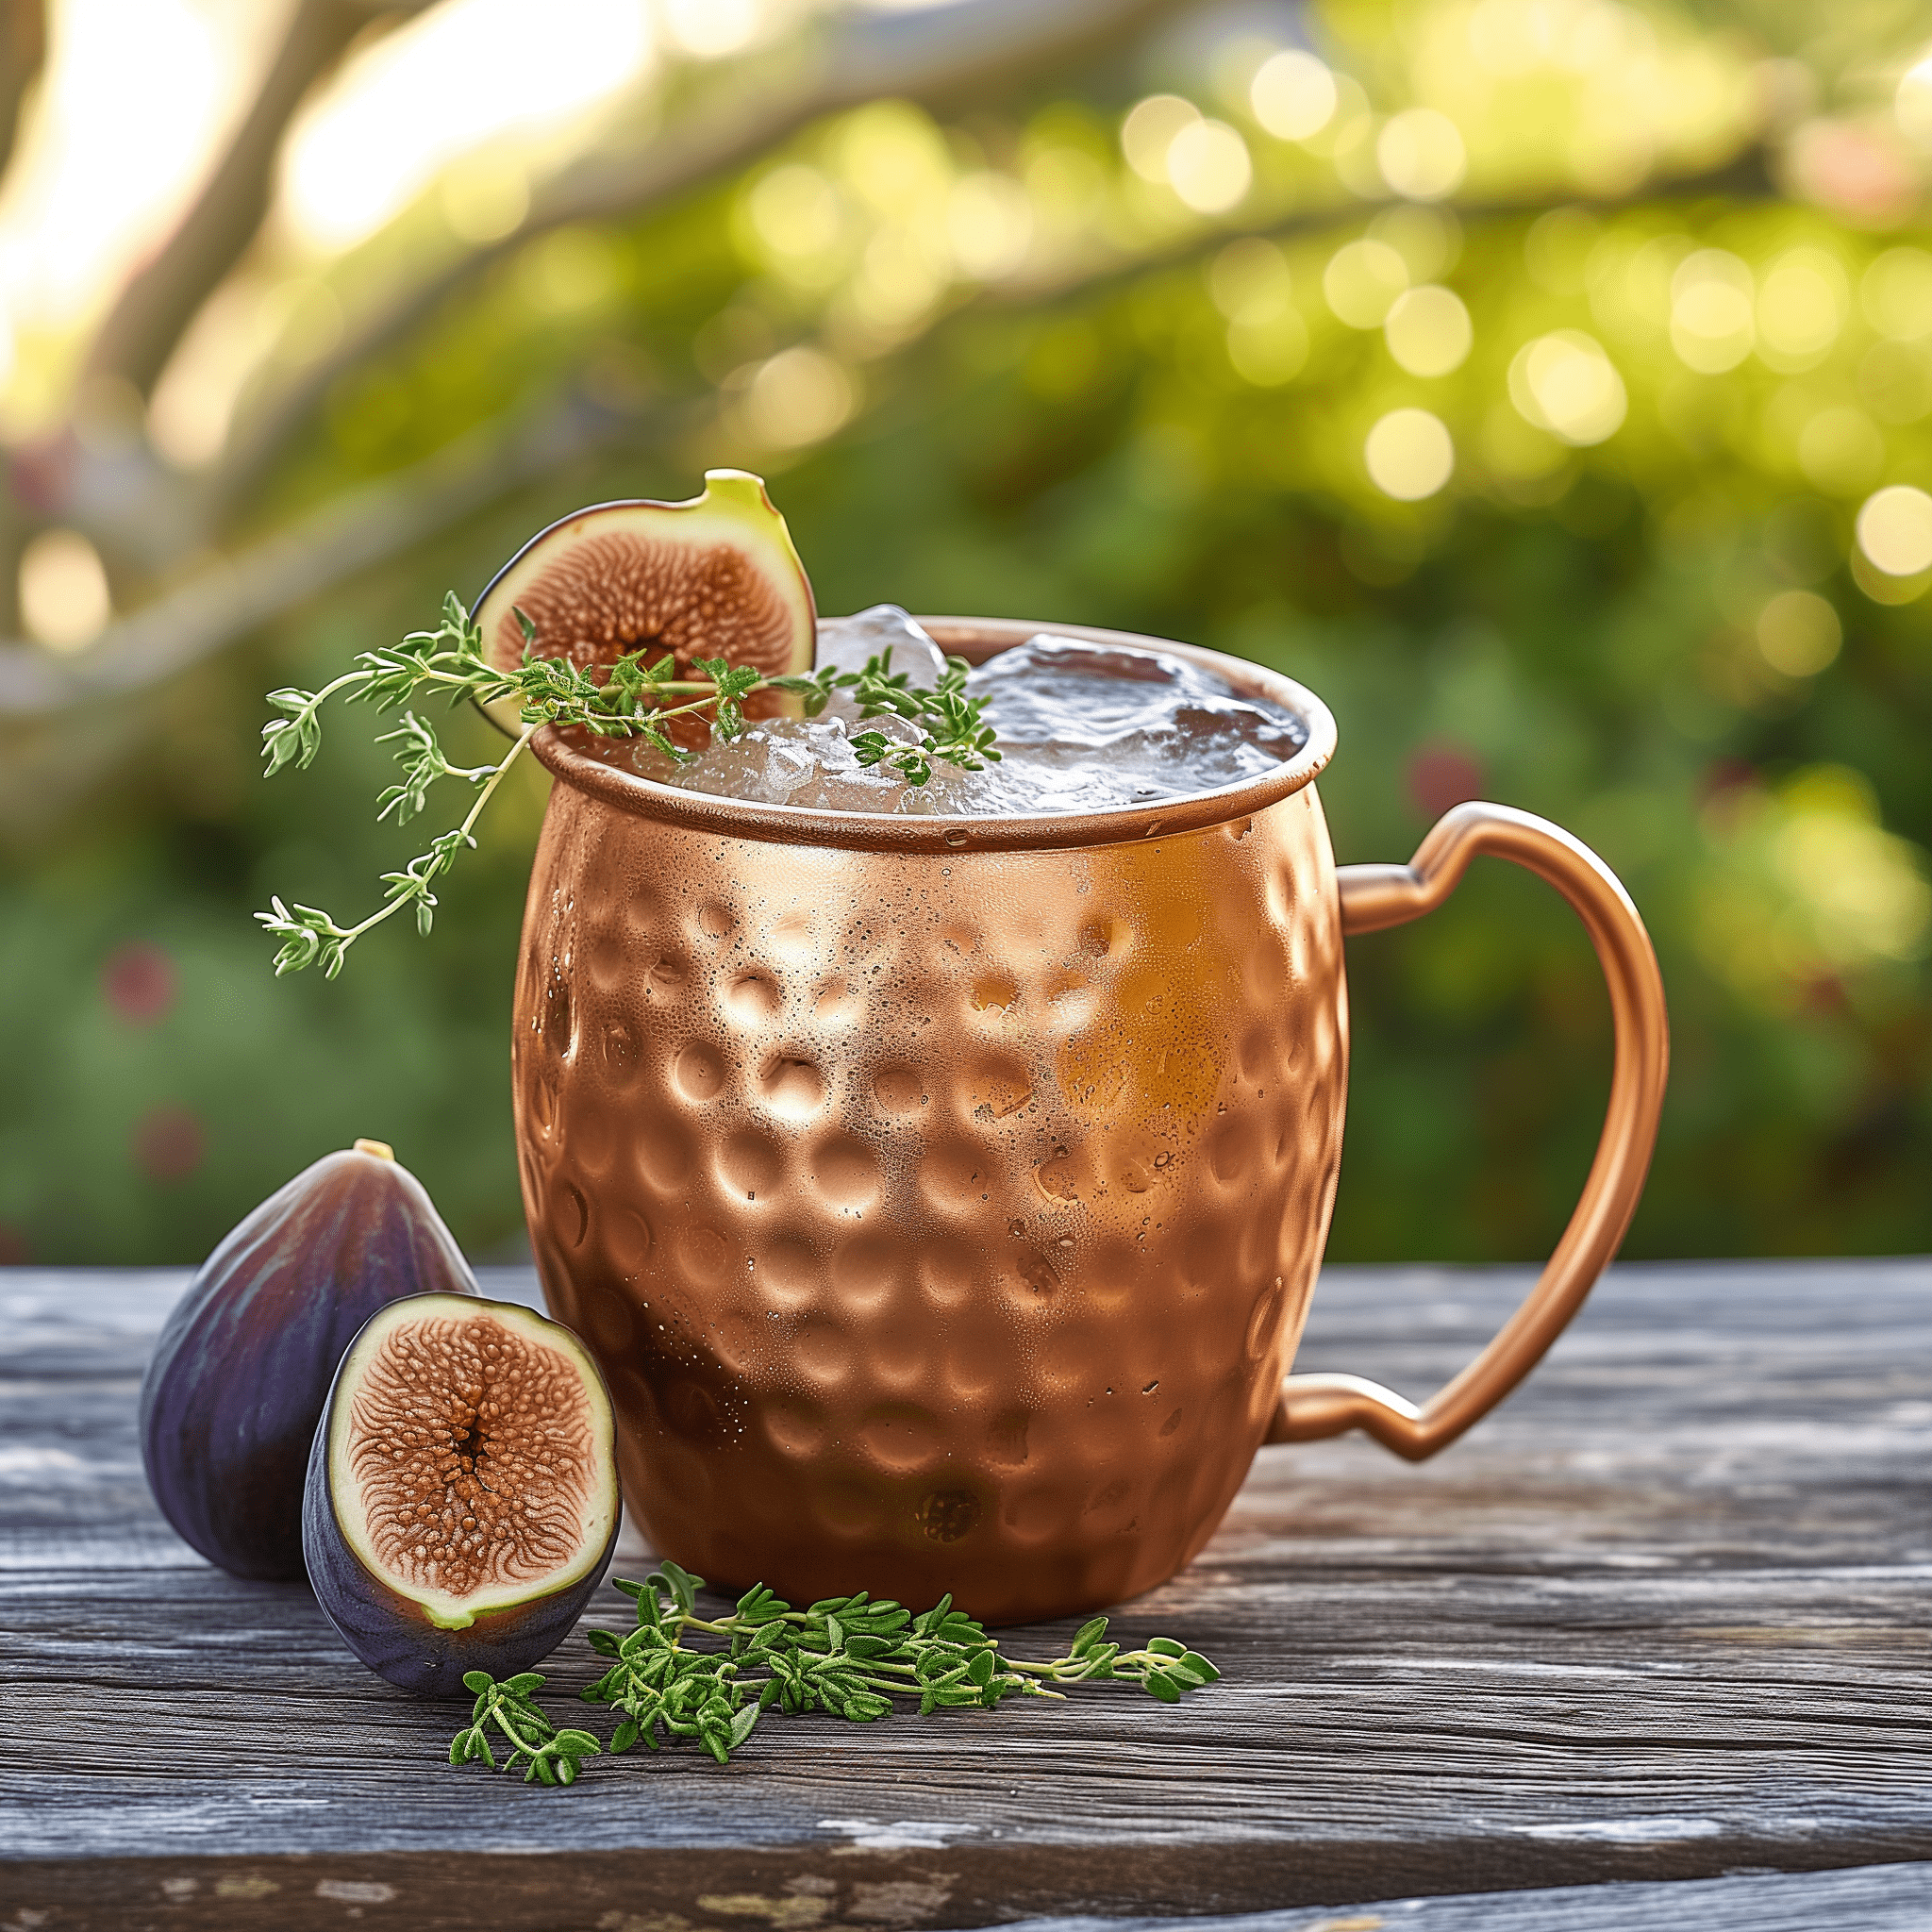 Mediterranean Mule Cocktail Recipe - The Mediterranean Mule offers a sweet and slightly tangy taste from the limoncello, complemented by the warm, spicy undertones of ginger beer. The fig vodka adds a unique sweetness and fruitiness, while the thyme provides an aromatic herbal note. It's a complex yet harmonious blend that is both refreshing and invigorating.